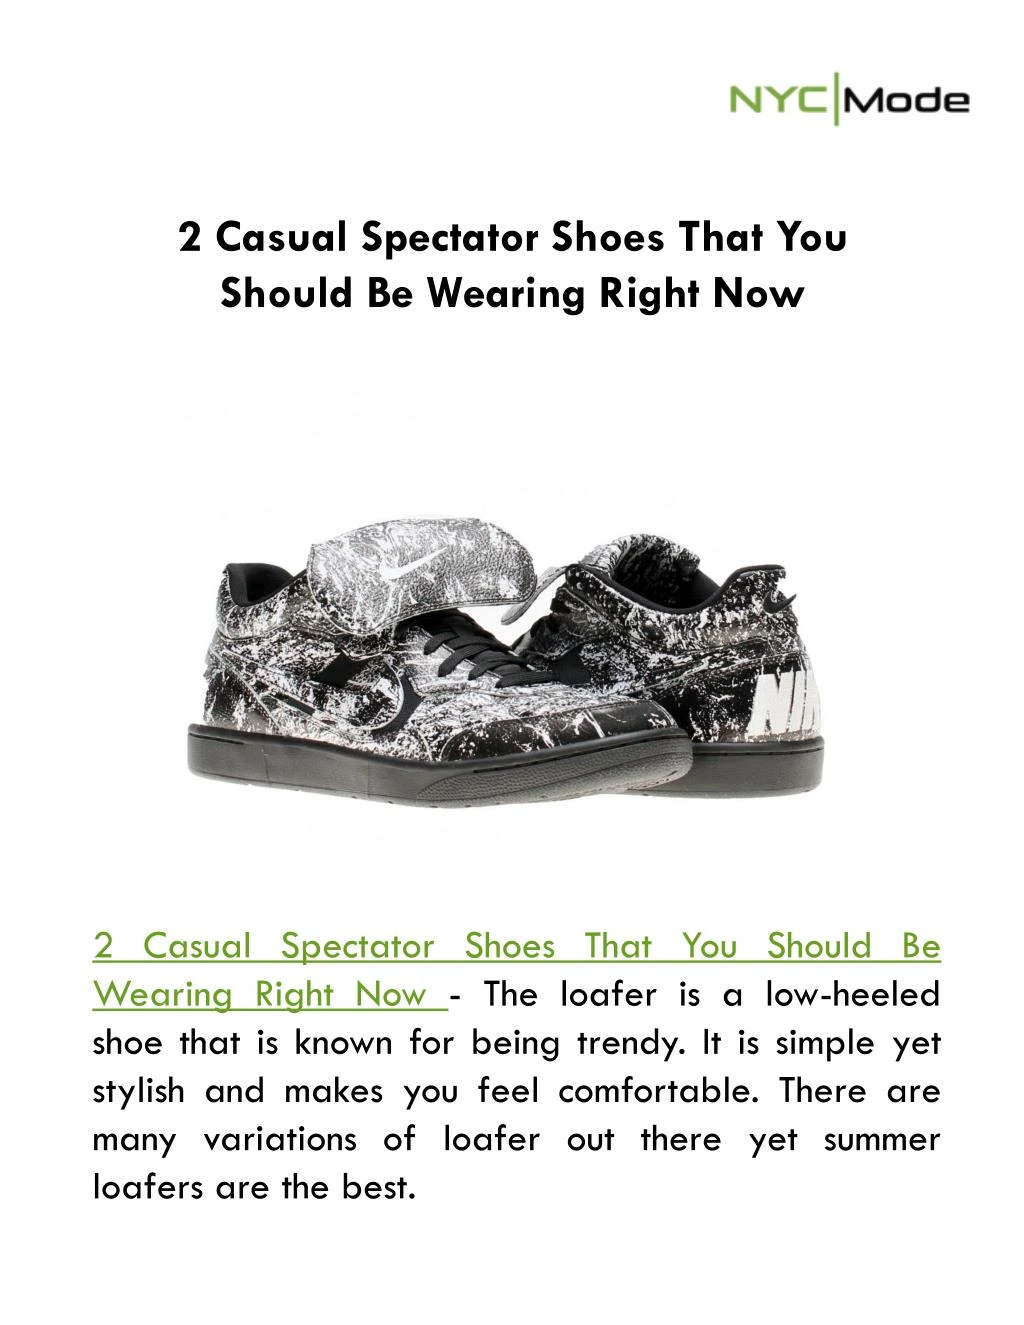 2 casual spectator shoes that you should